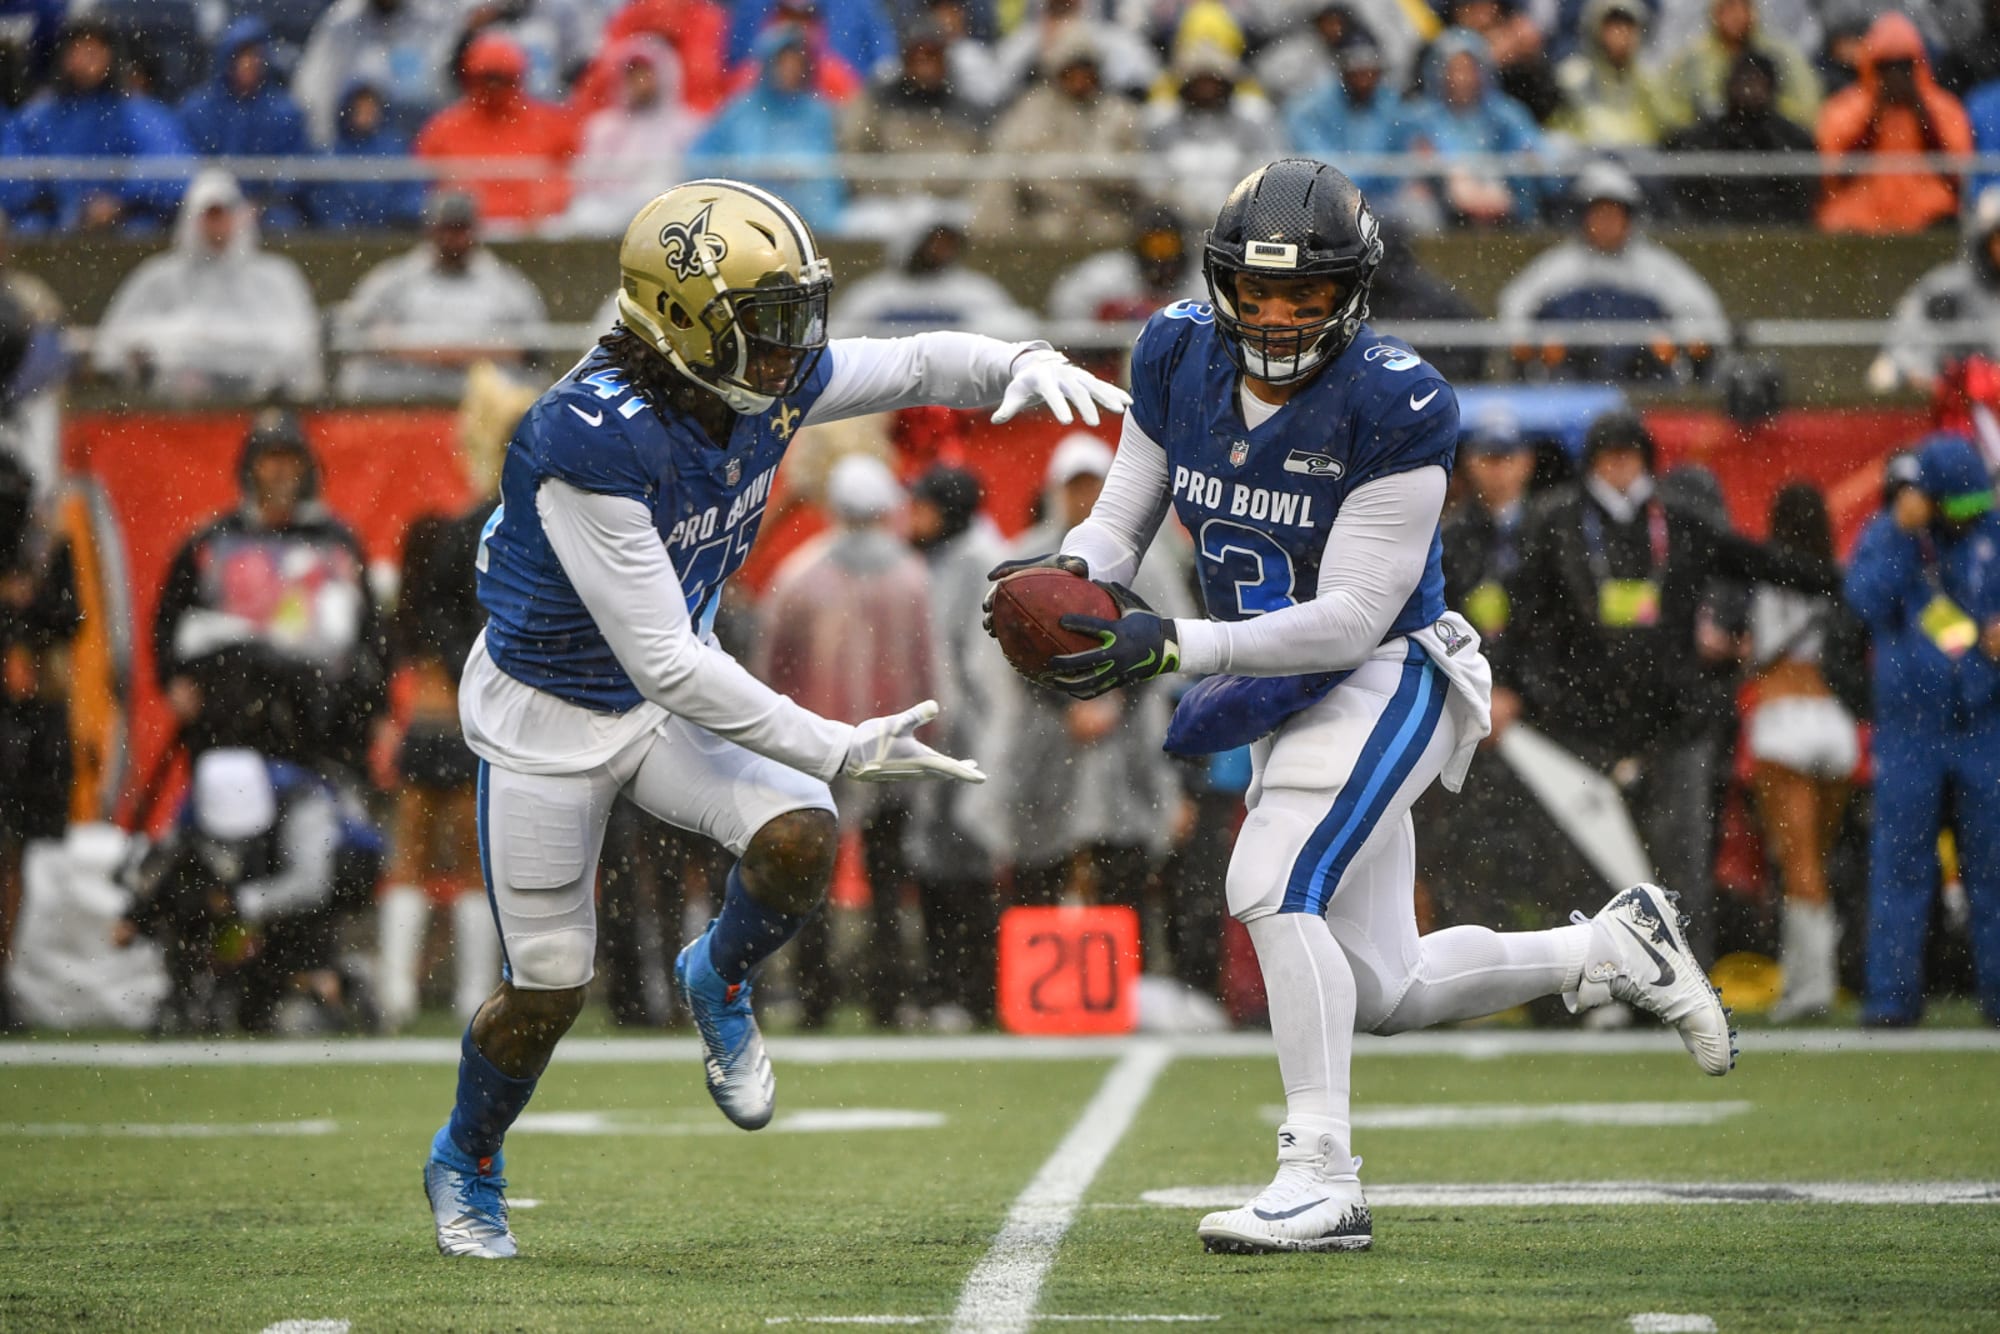 NFL Pro Bowl 2020: 5 Ways to make the game worth watching